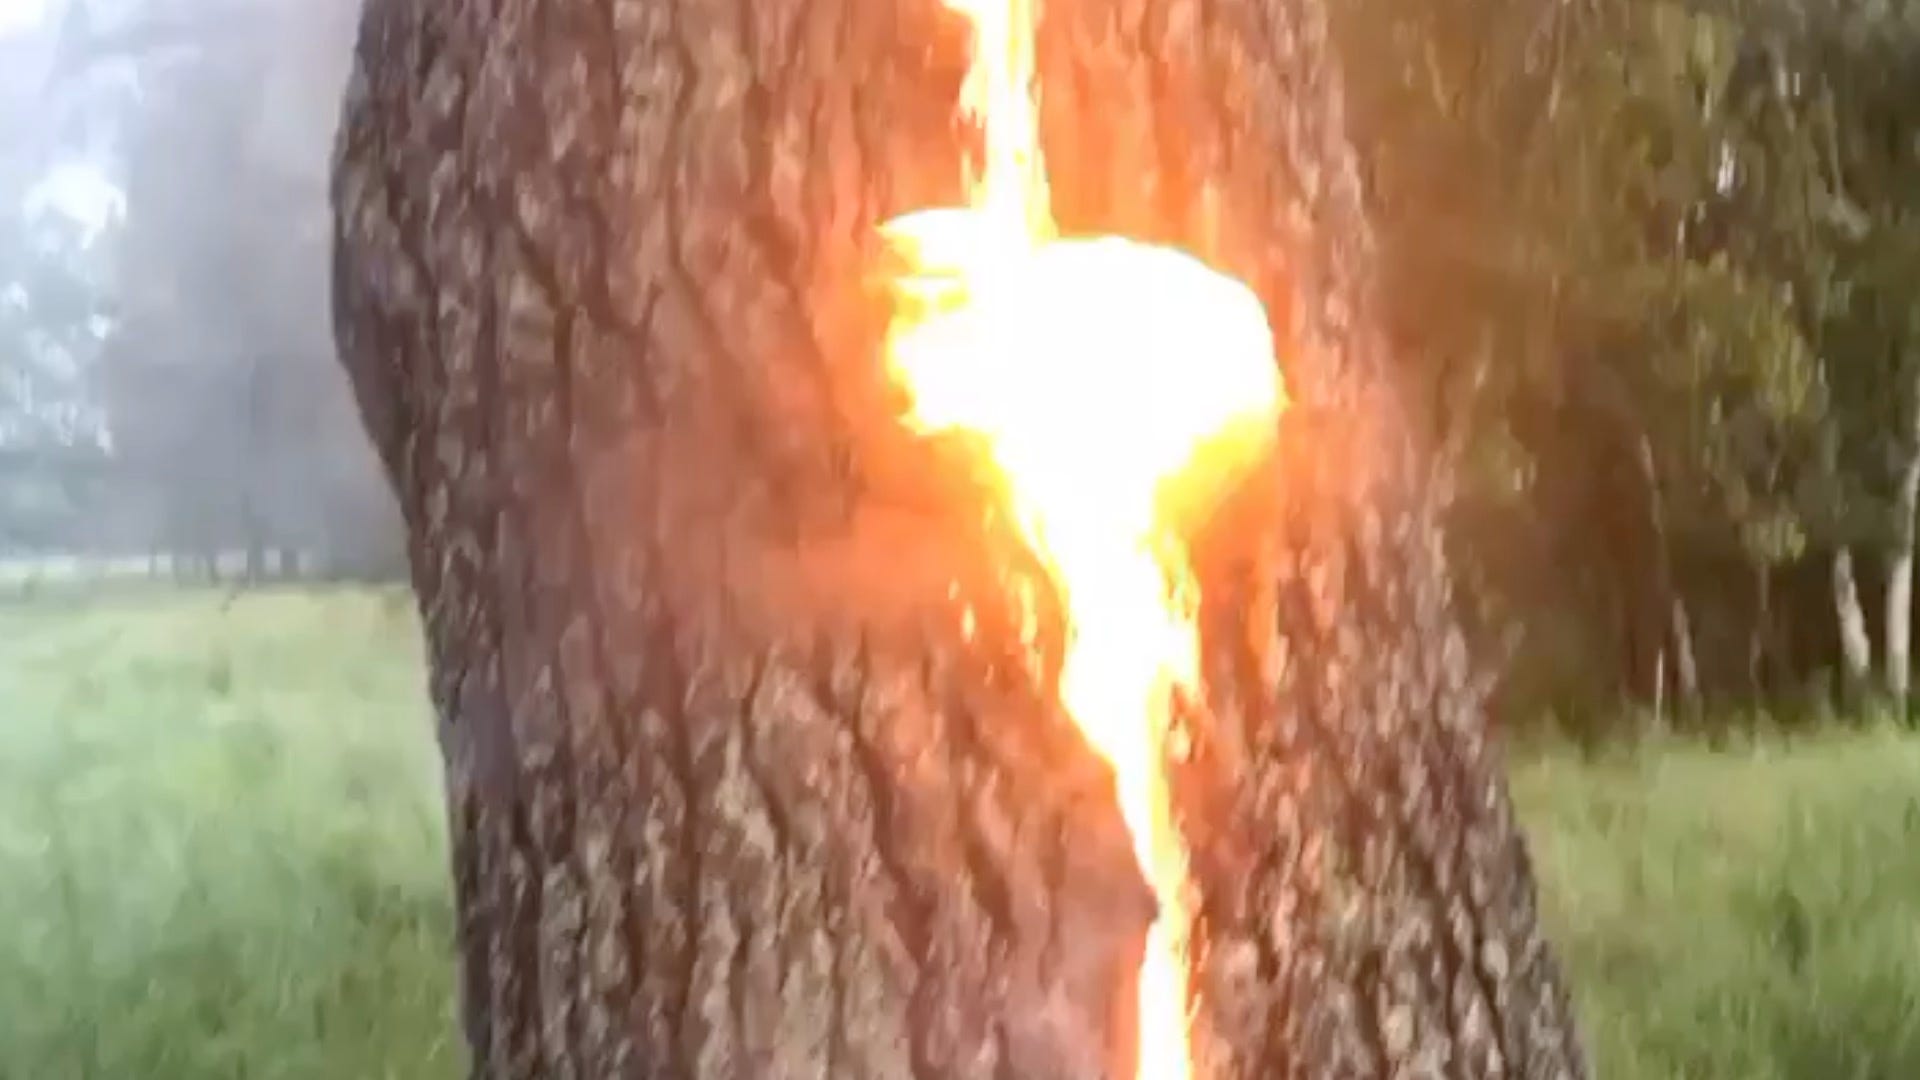 Lightning ignites a fire inside a tree in Maine